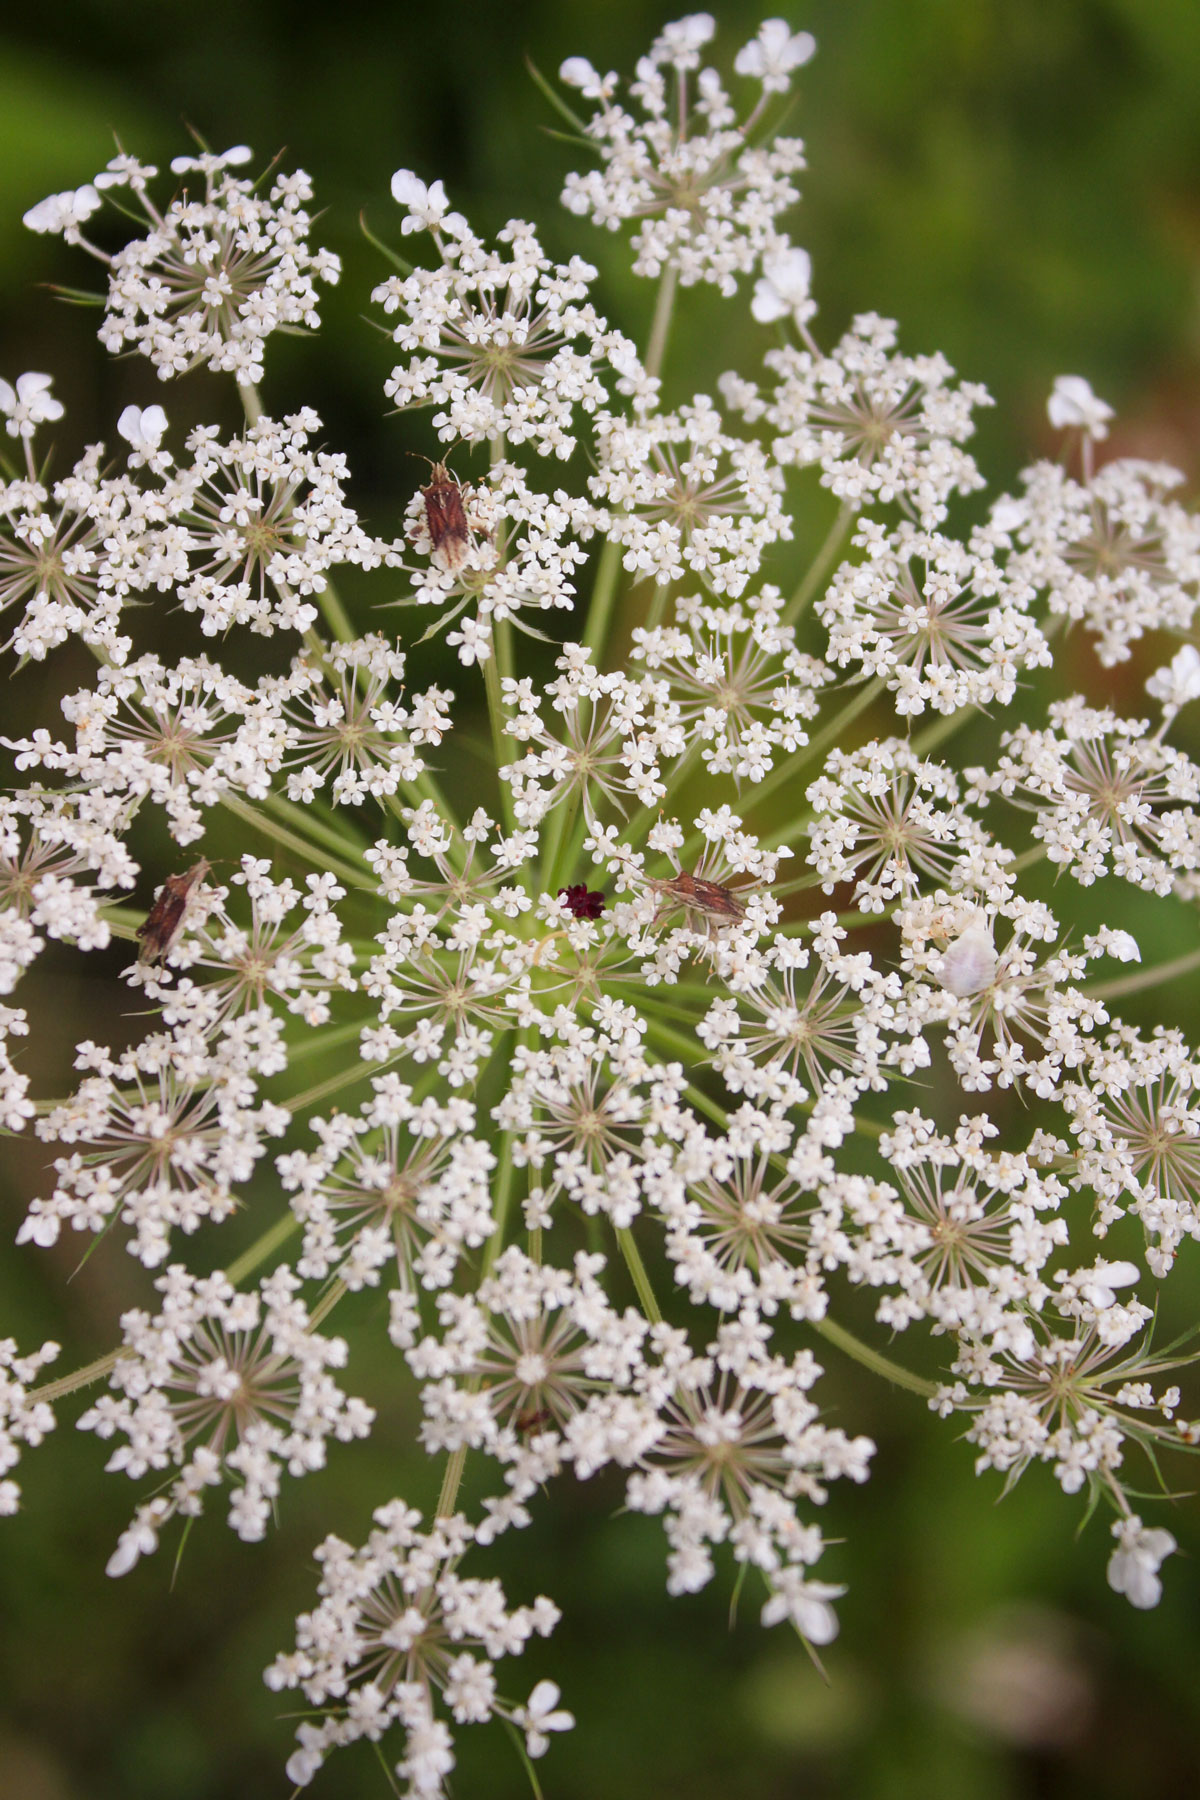 Look very closely to see the tiny burgandy dot in the center of Queen Anne's Lace flowers